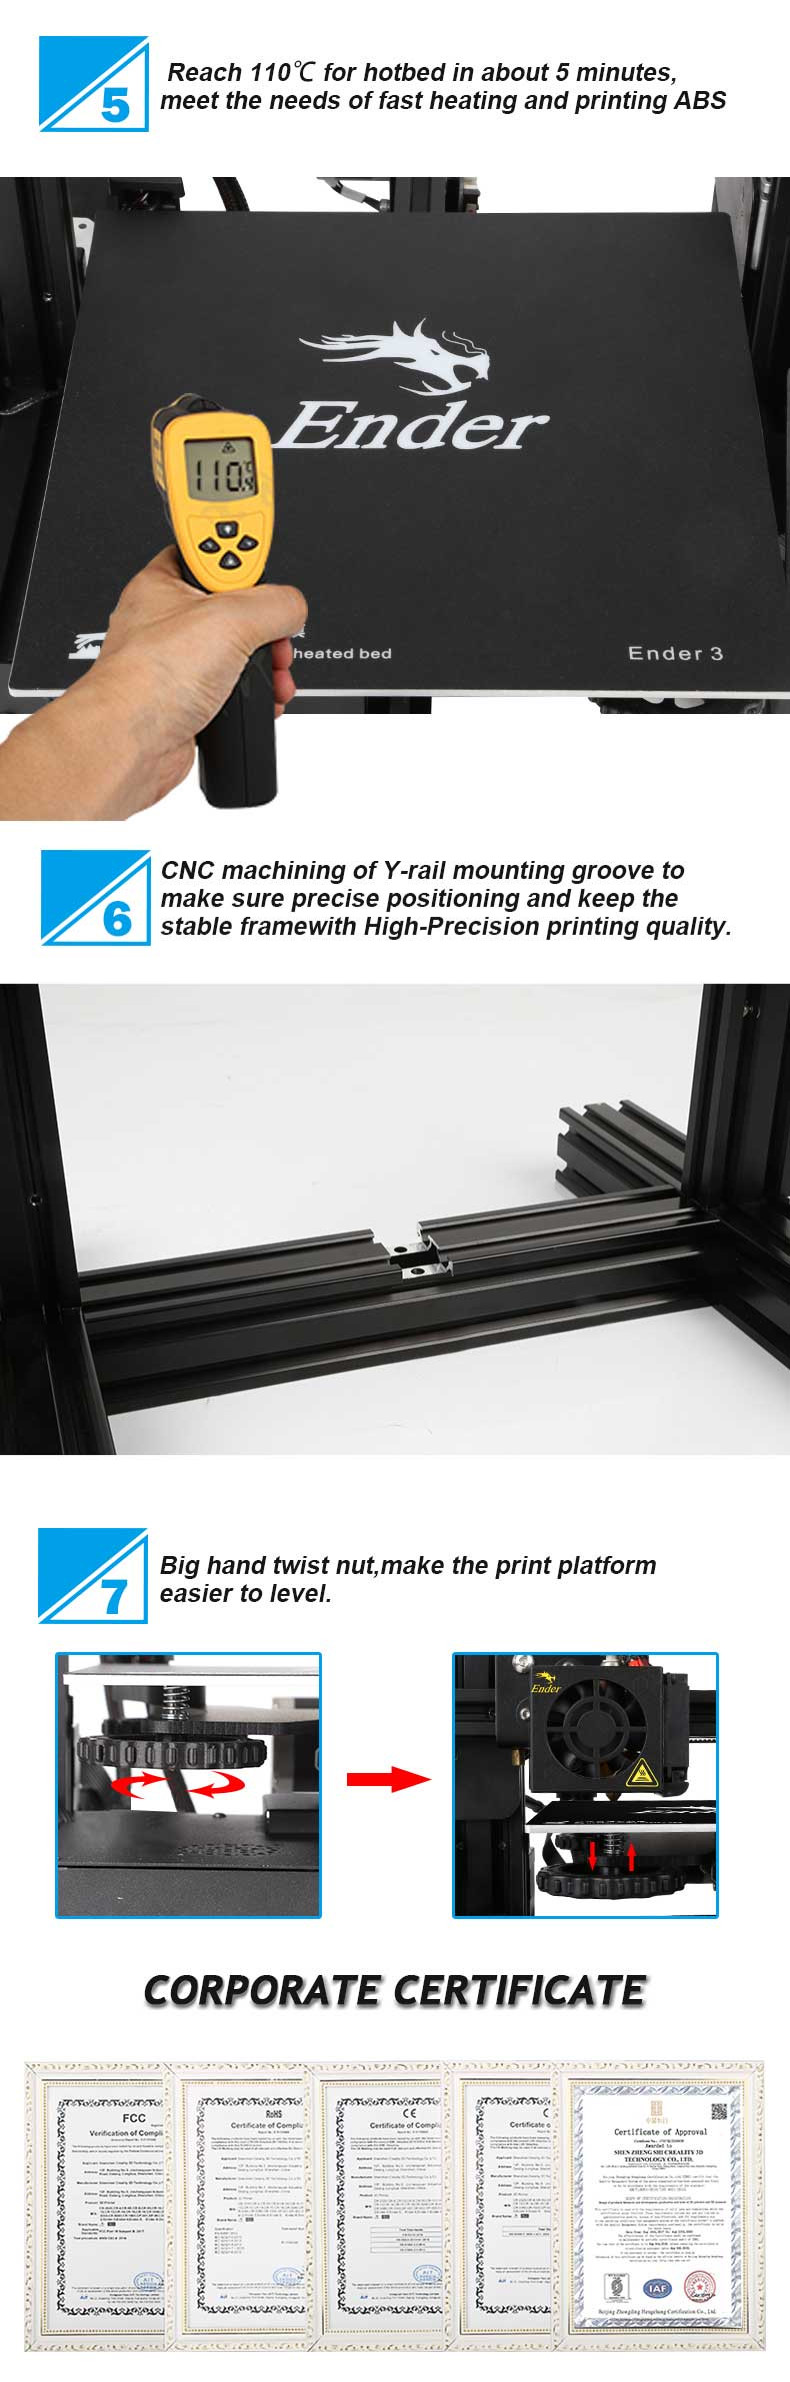 Creality 3D® Ender-3 V-slot Prusa I3 DIY 3D Printer Kit 220x220x250mm Printing Size With Power Resume Function/MK10 Extruder 1.75mm 0.4mm Nozzle 34